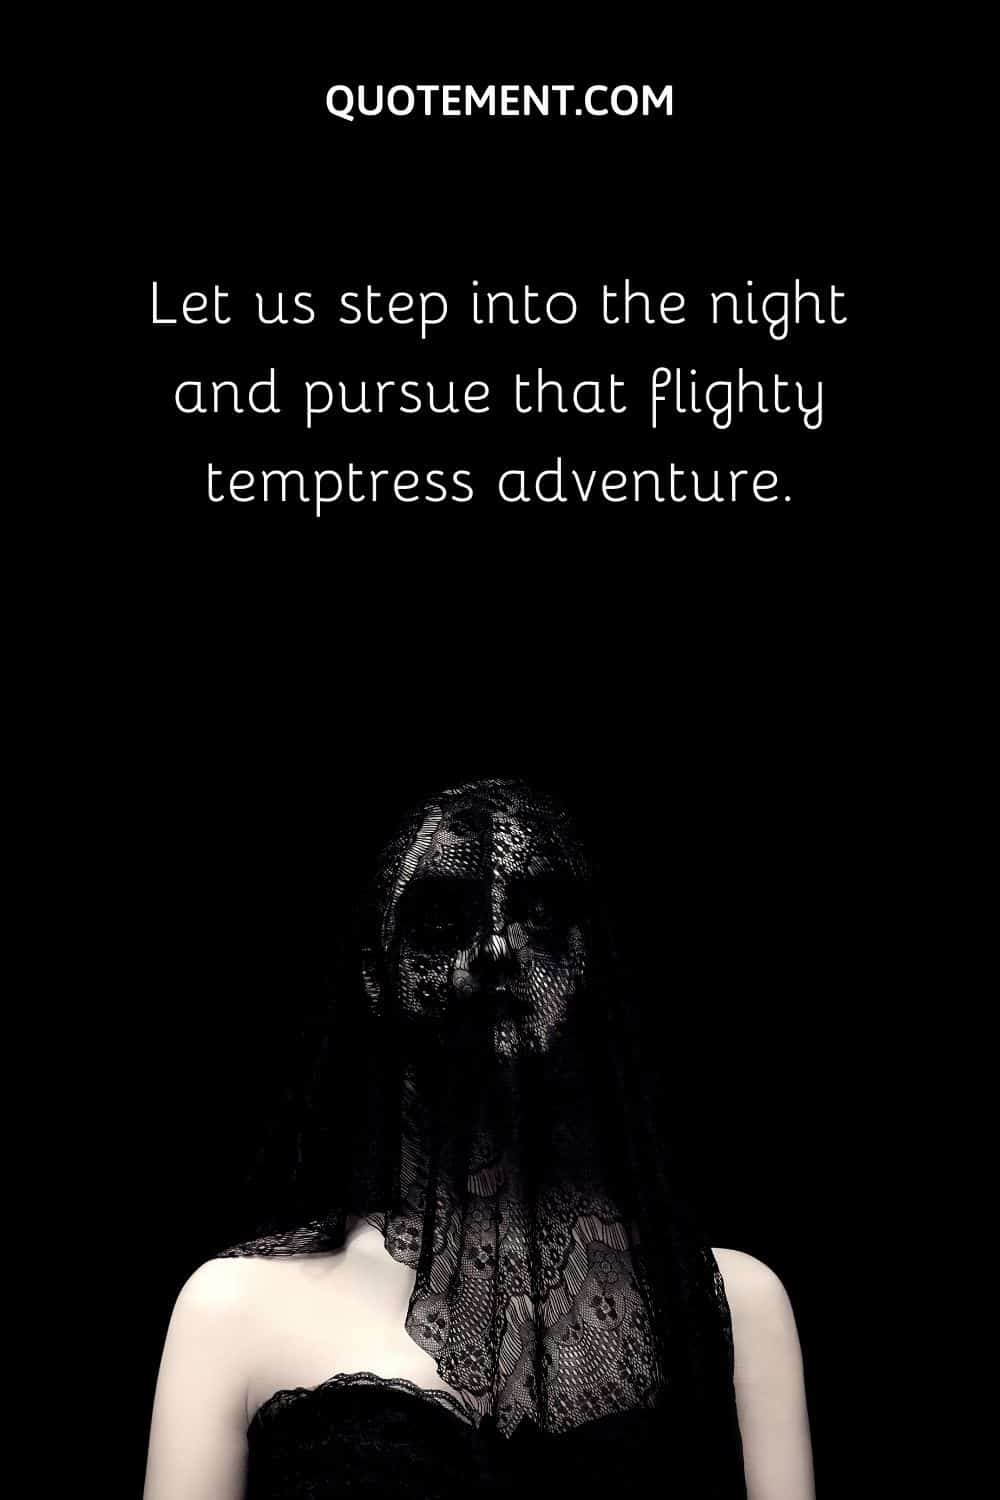 Let us step into the night and pursue that flighty temptress adventure